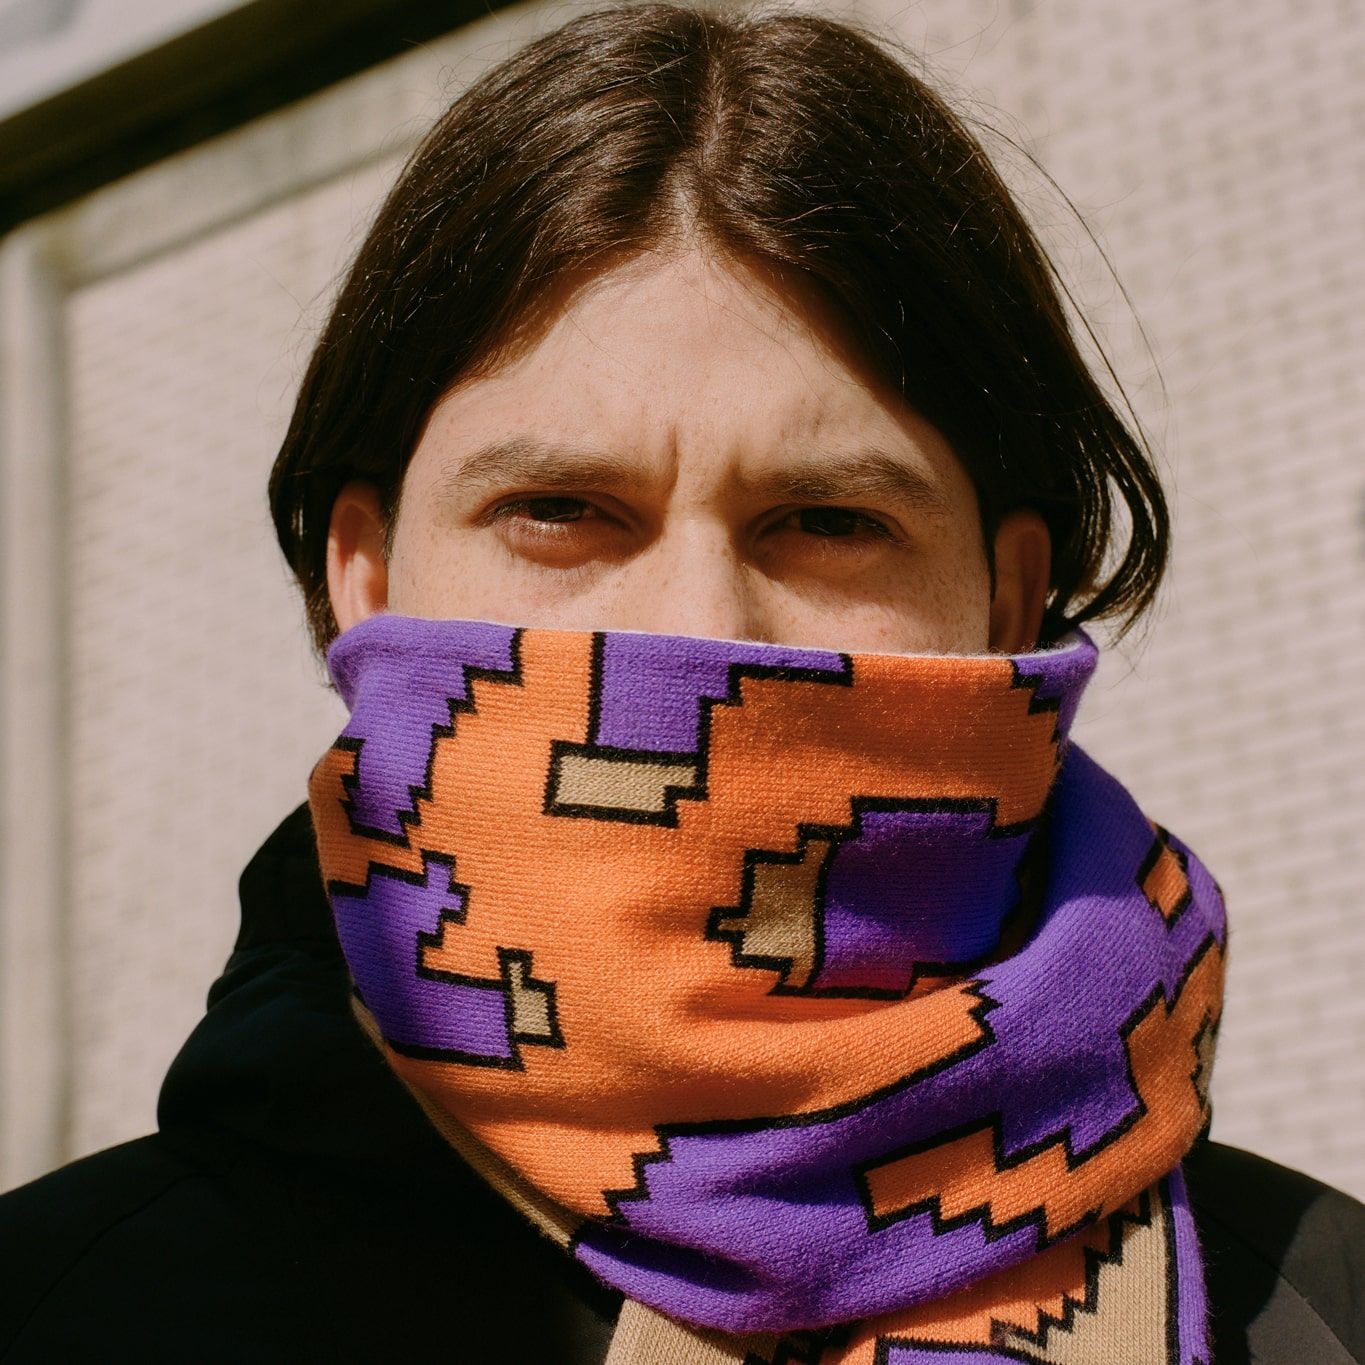 Man with a scarf around his neck